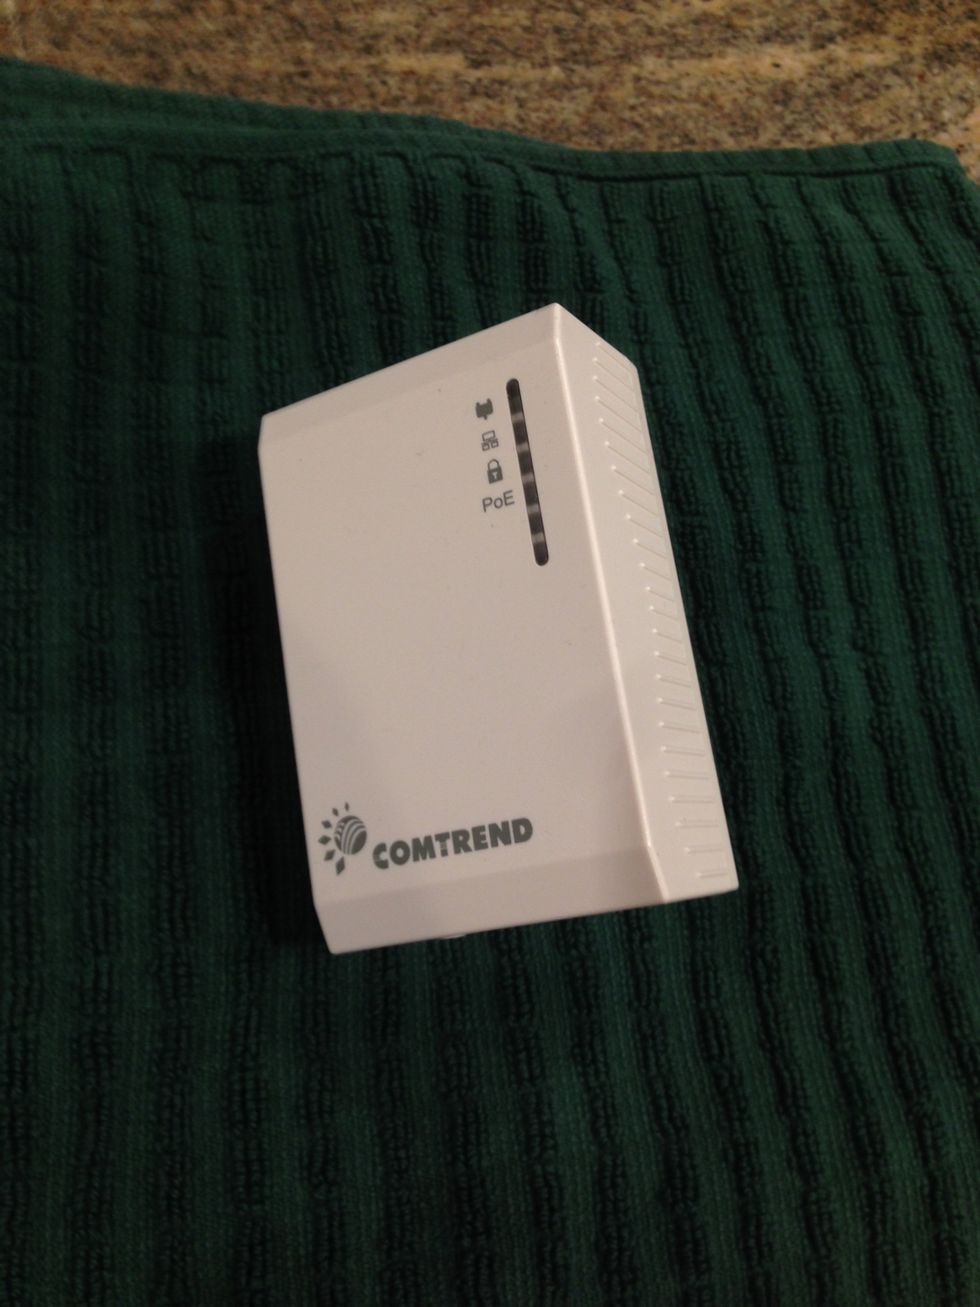 A photo of a Powerline Converter used by Vivint to power and connect their home security products.